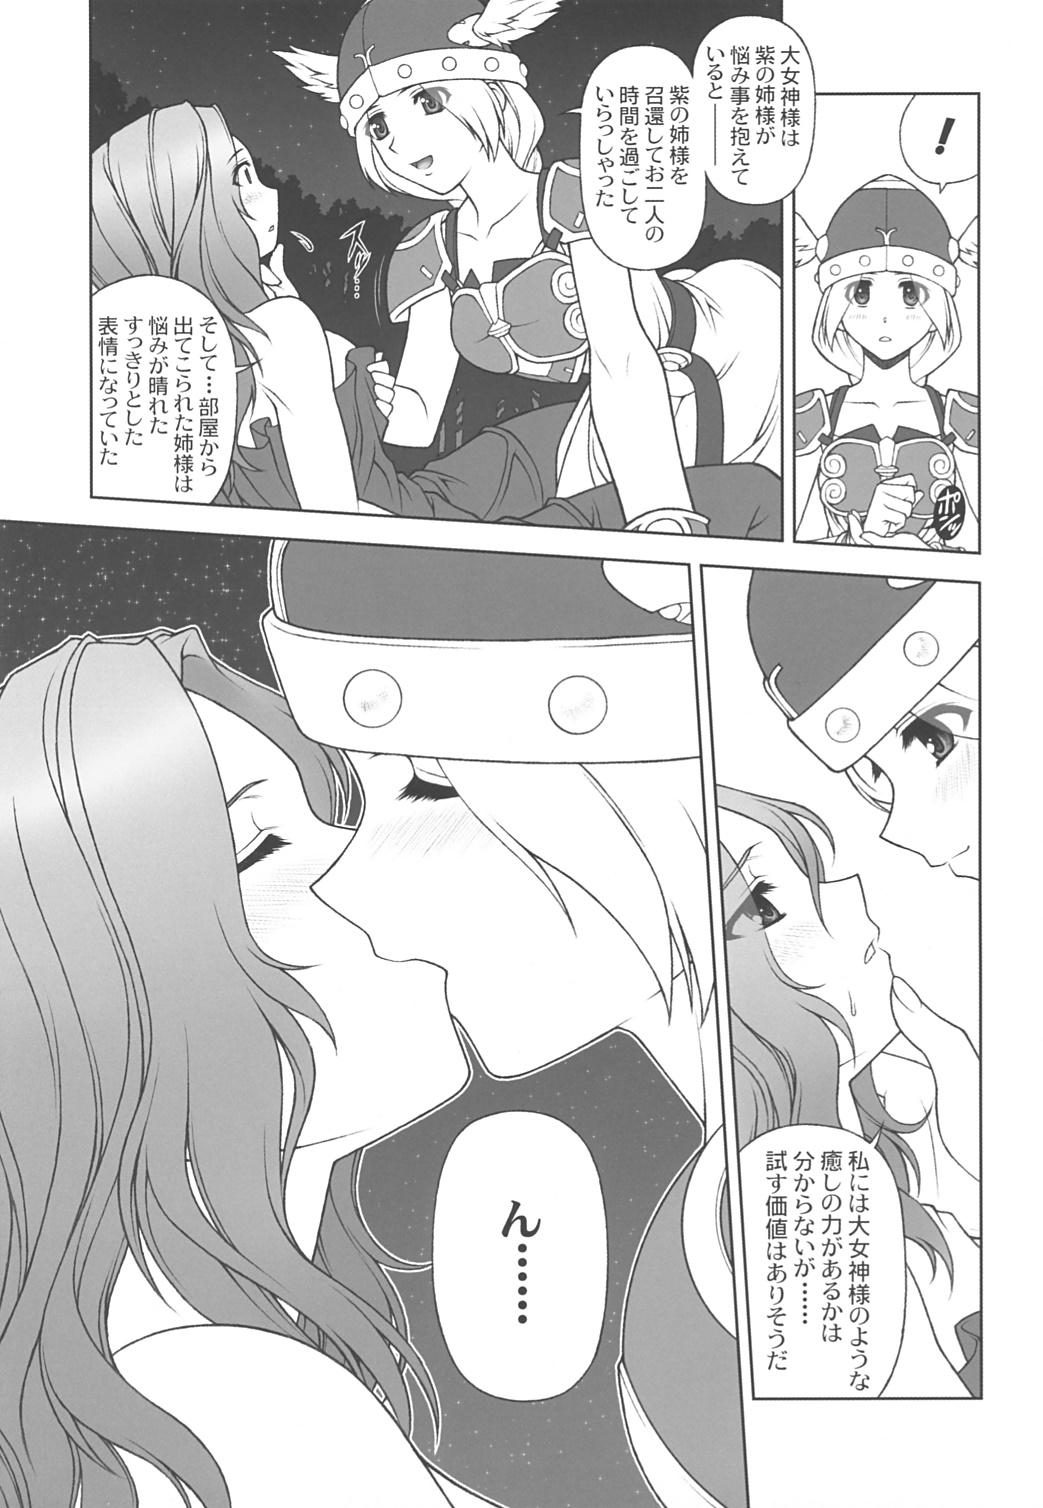 Emo THE EXPERIENCE OF WALKURE - Valkyrie no bouken Squirt - Page 6